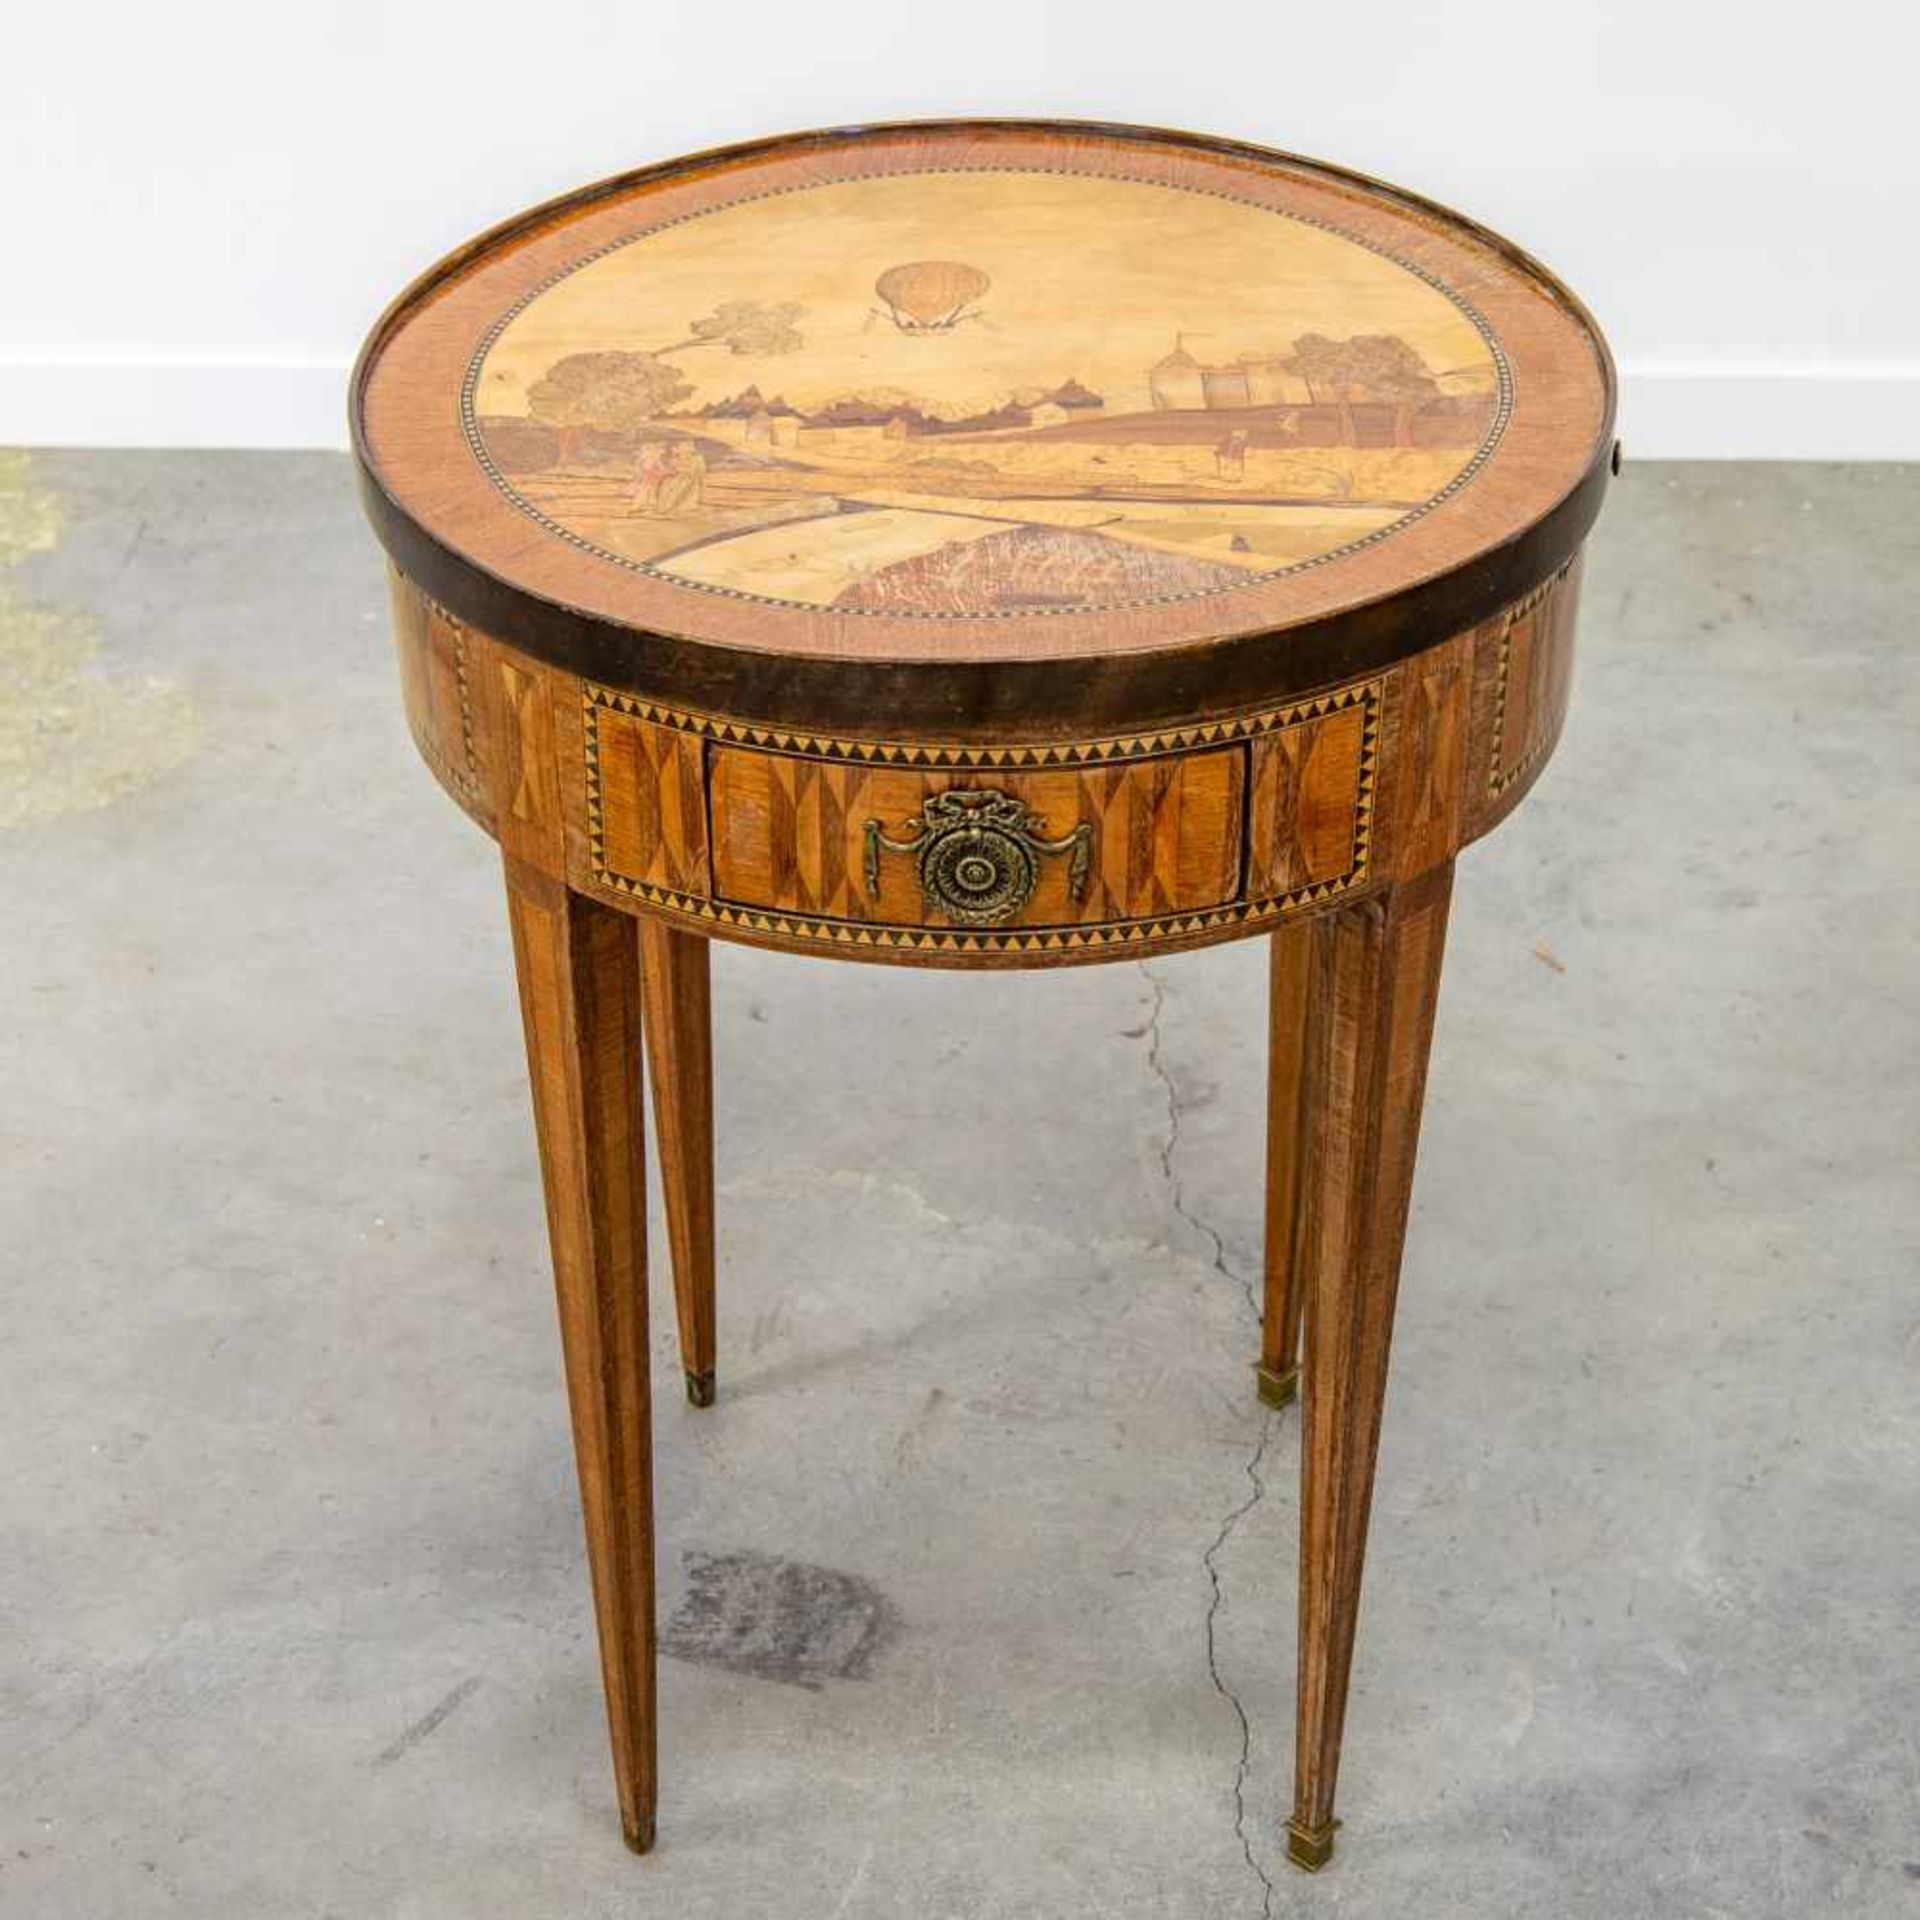 Maître DUBOISAntique game table, decorated with a marquetry 'Mongolfier' balloon and landscape and a